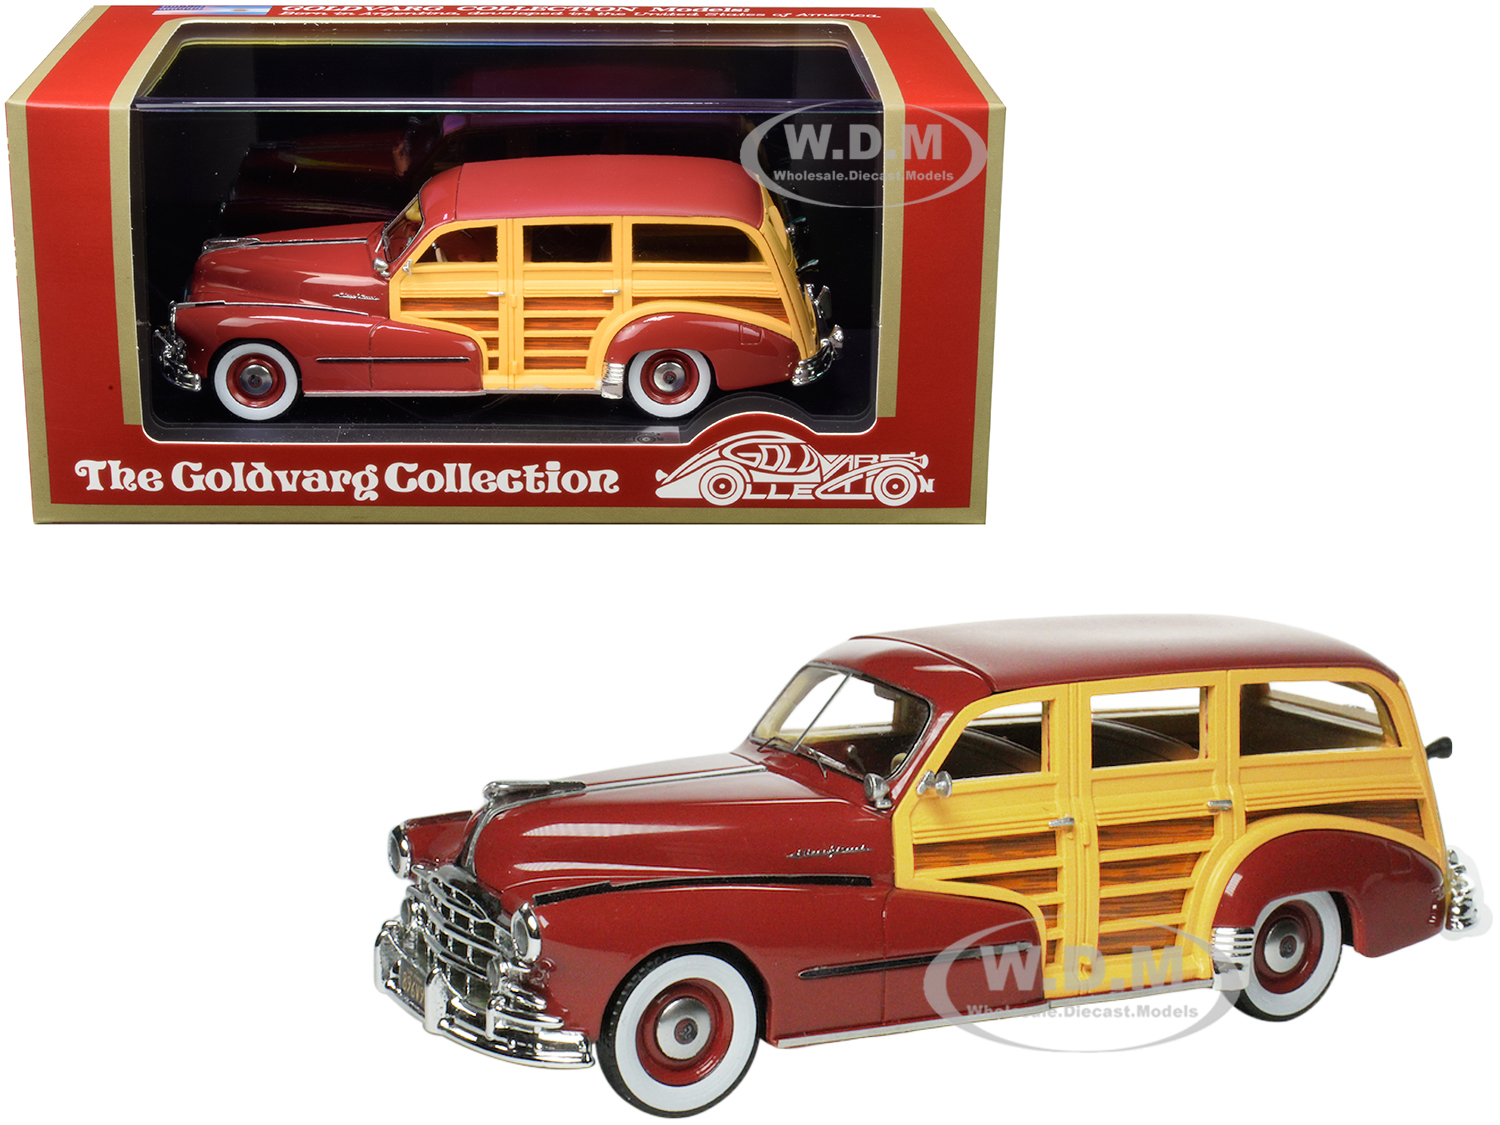 1948 Pontiac Streamlined Woodie Rio Red Limited Edition To 200 Pieces Worldwide 1/43 Model Car By Goldvarg Collection